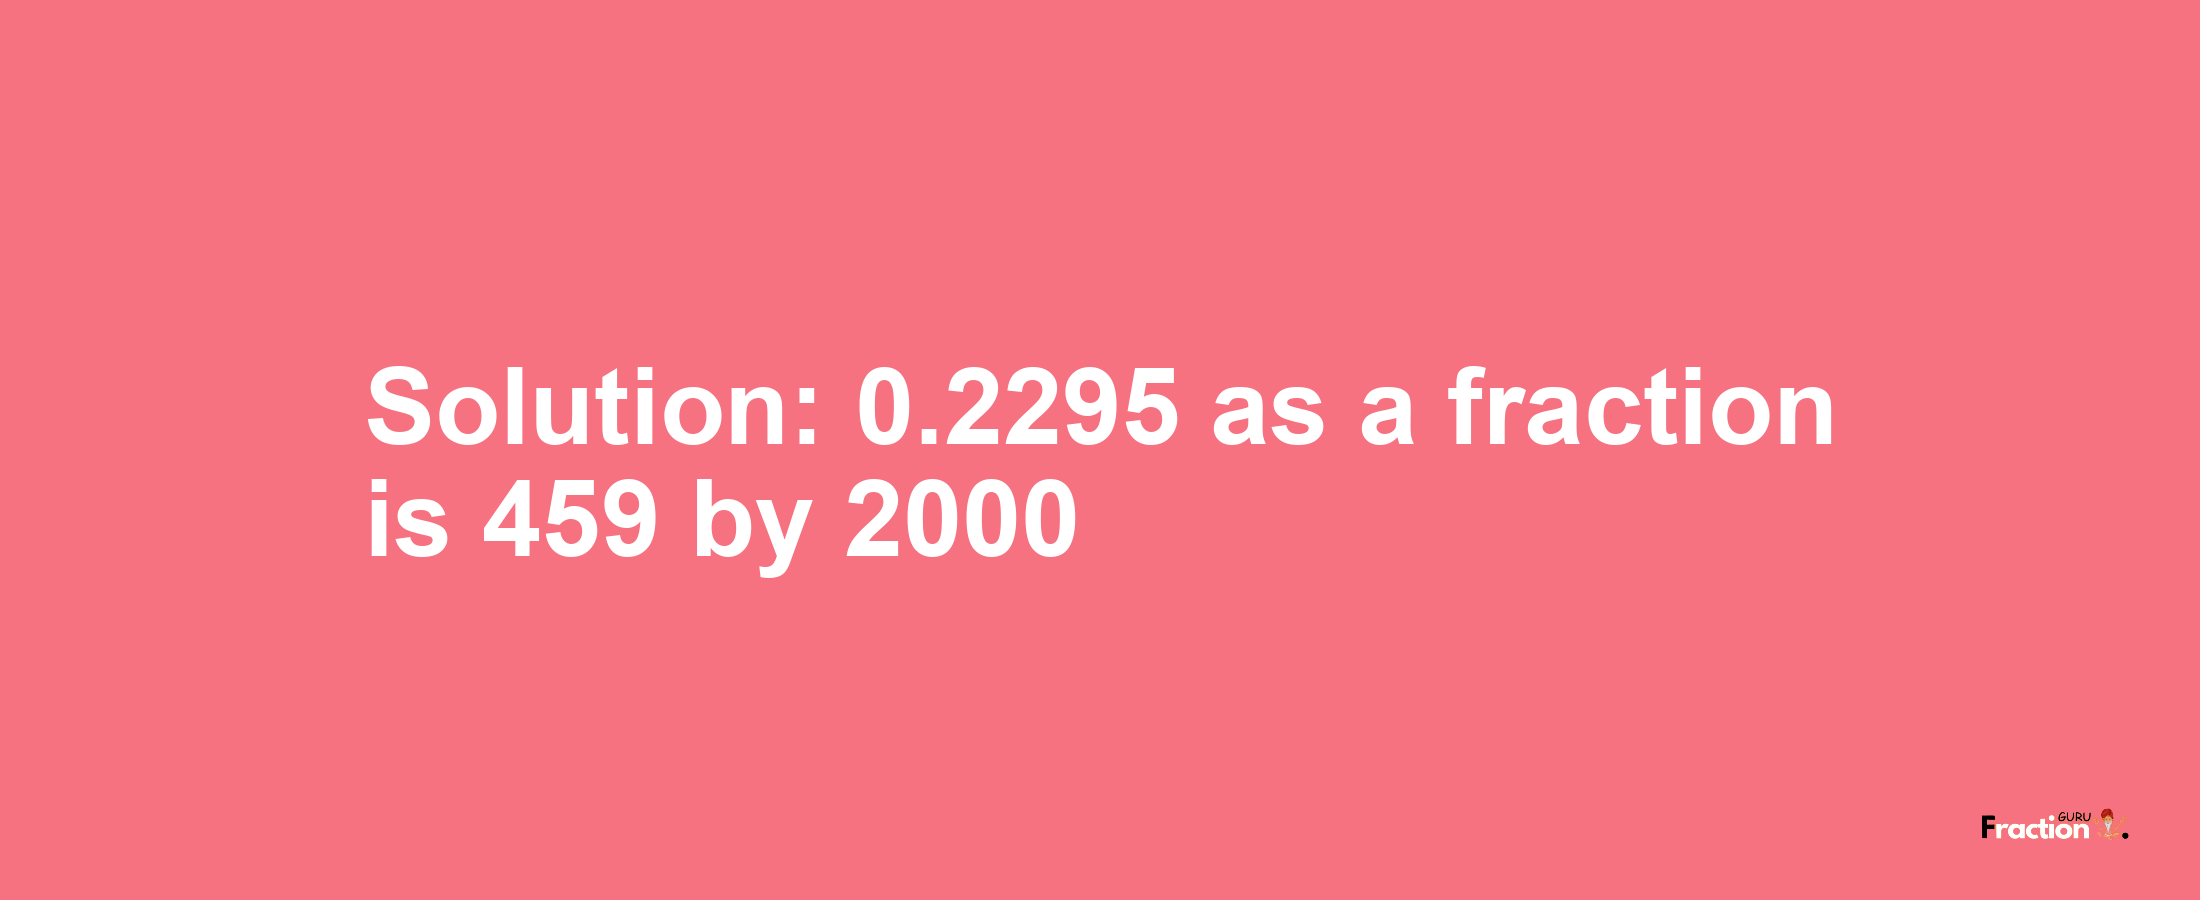 Solution:0.2295 as a fraction is 459/2000